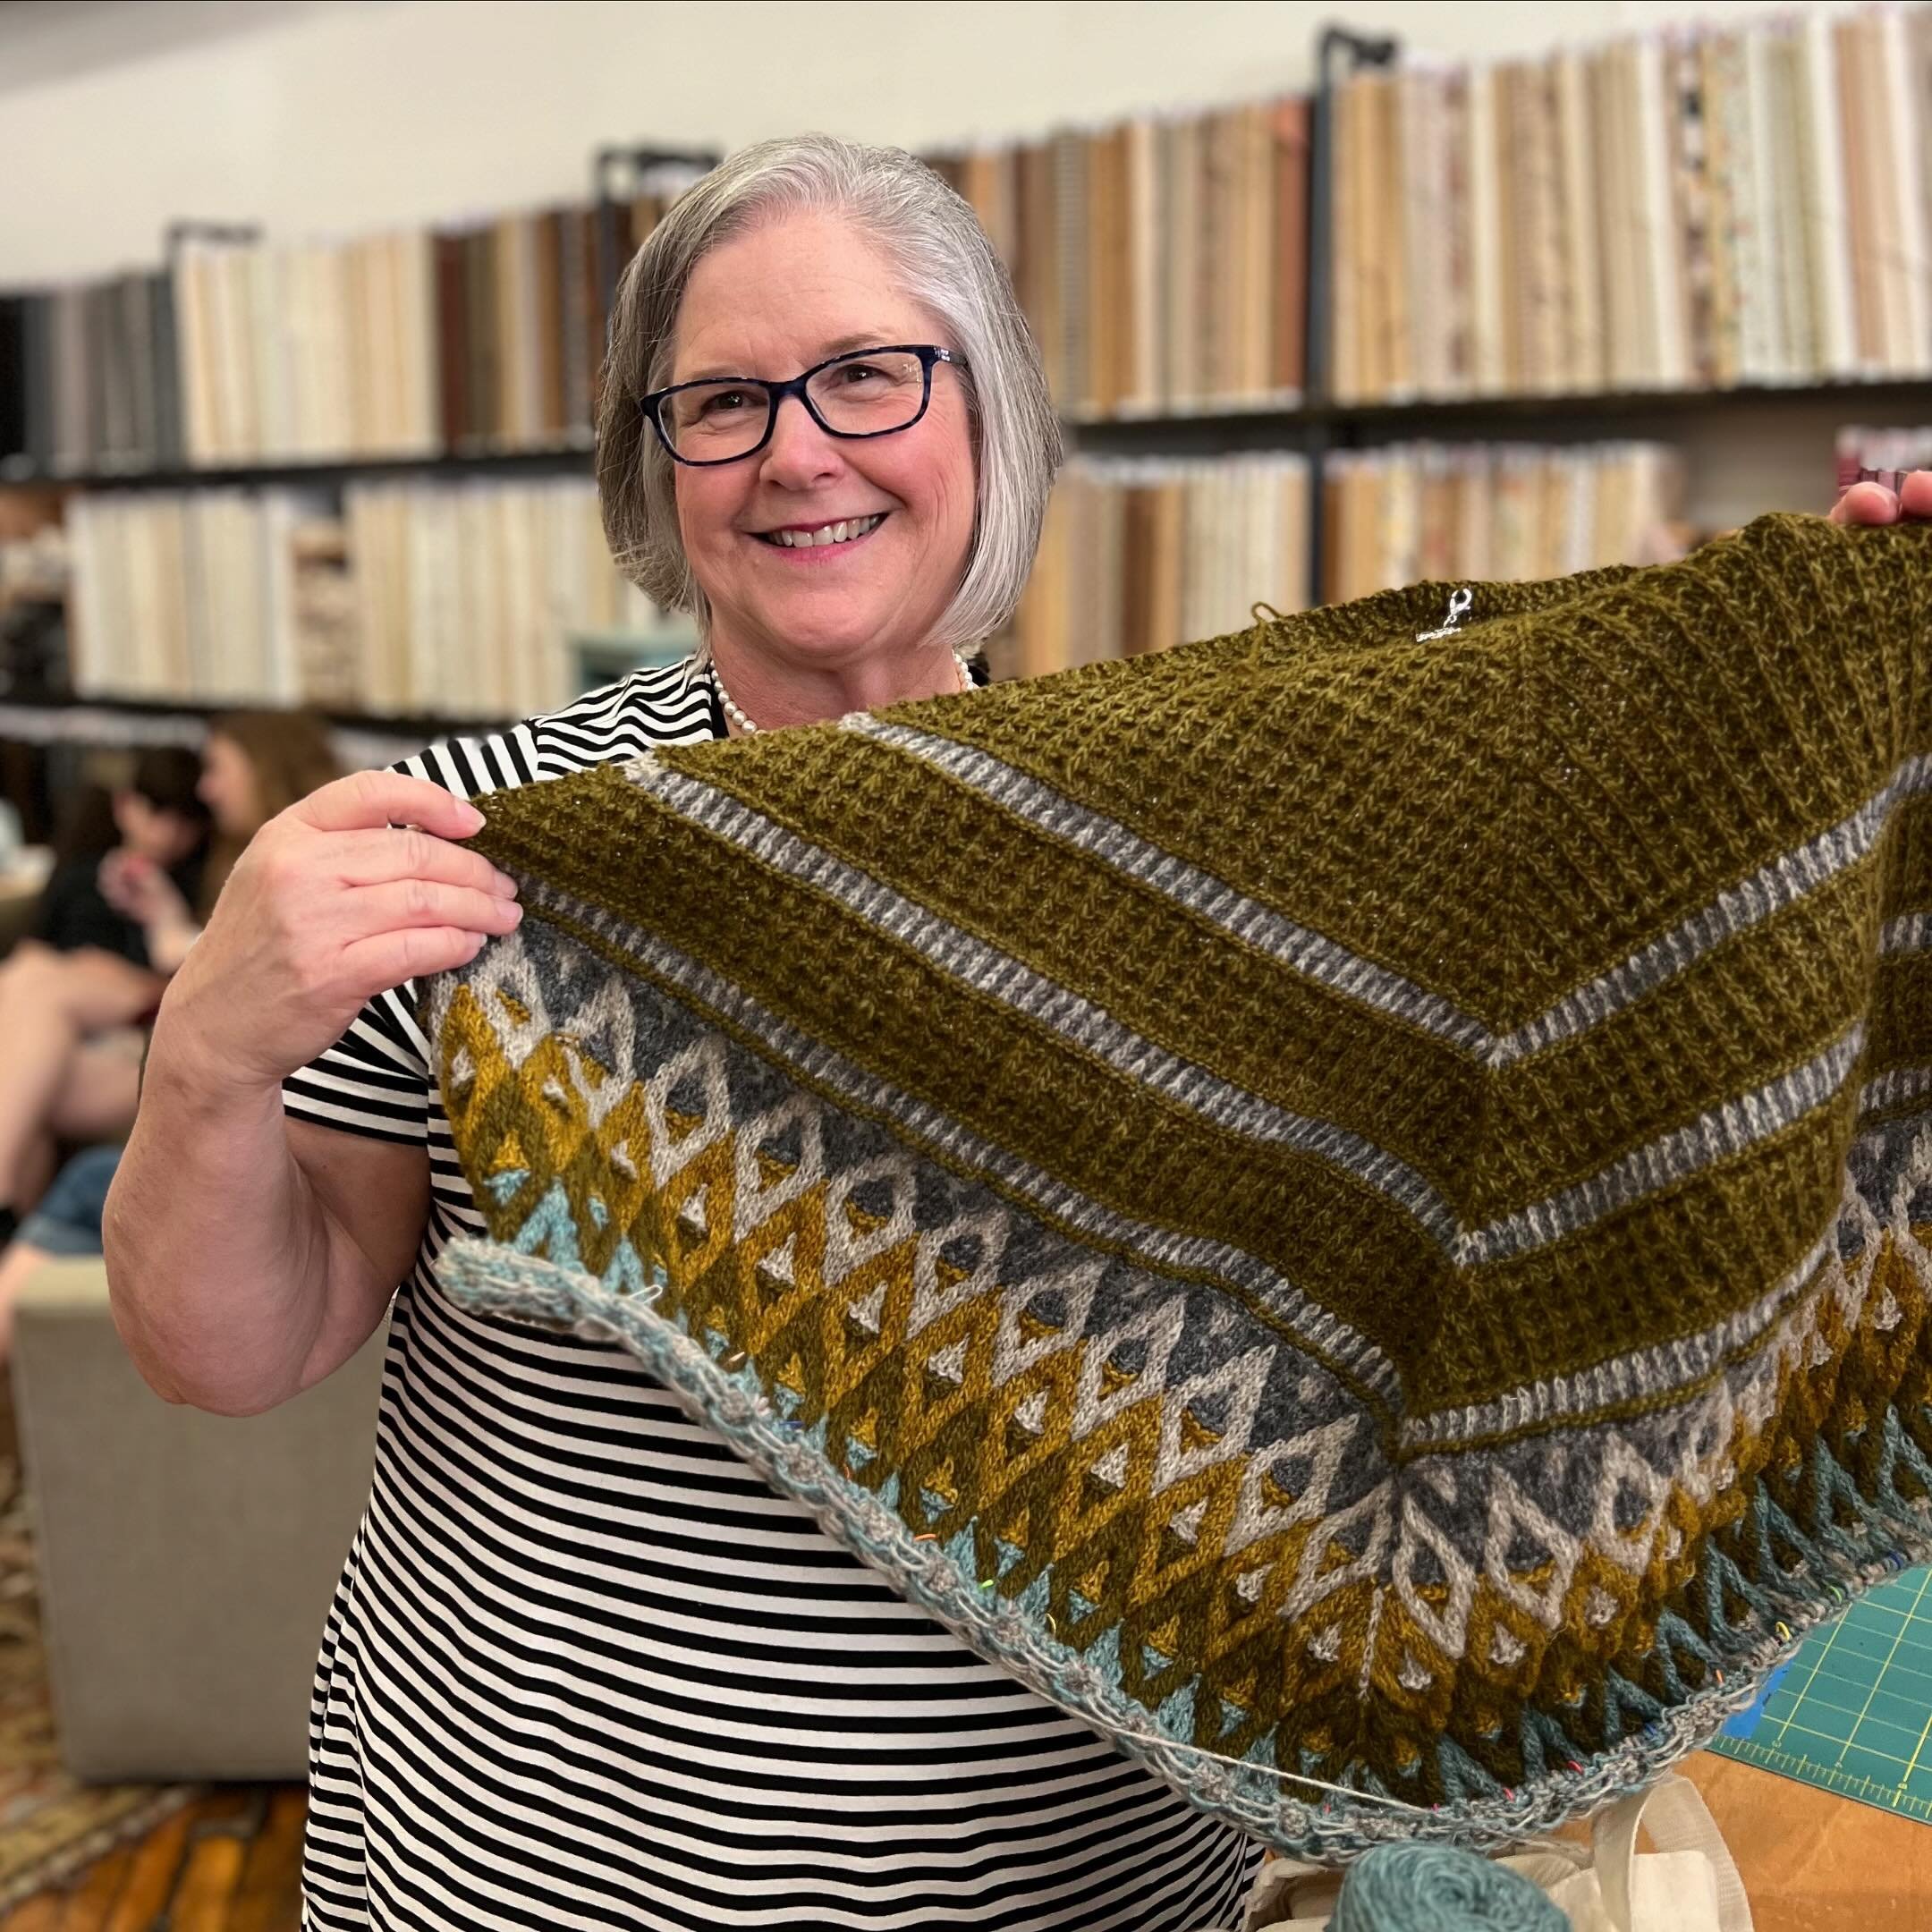 Julie came by to see us this weekend, and we are so inspired by her gorgeous #artusshawl! She&rsquo;s using the yarn that @moonstruck_knits designed it in - and goodness is it beautiful! 

She is part of our #mkartuskal. If you would like to join, it